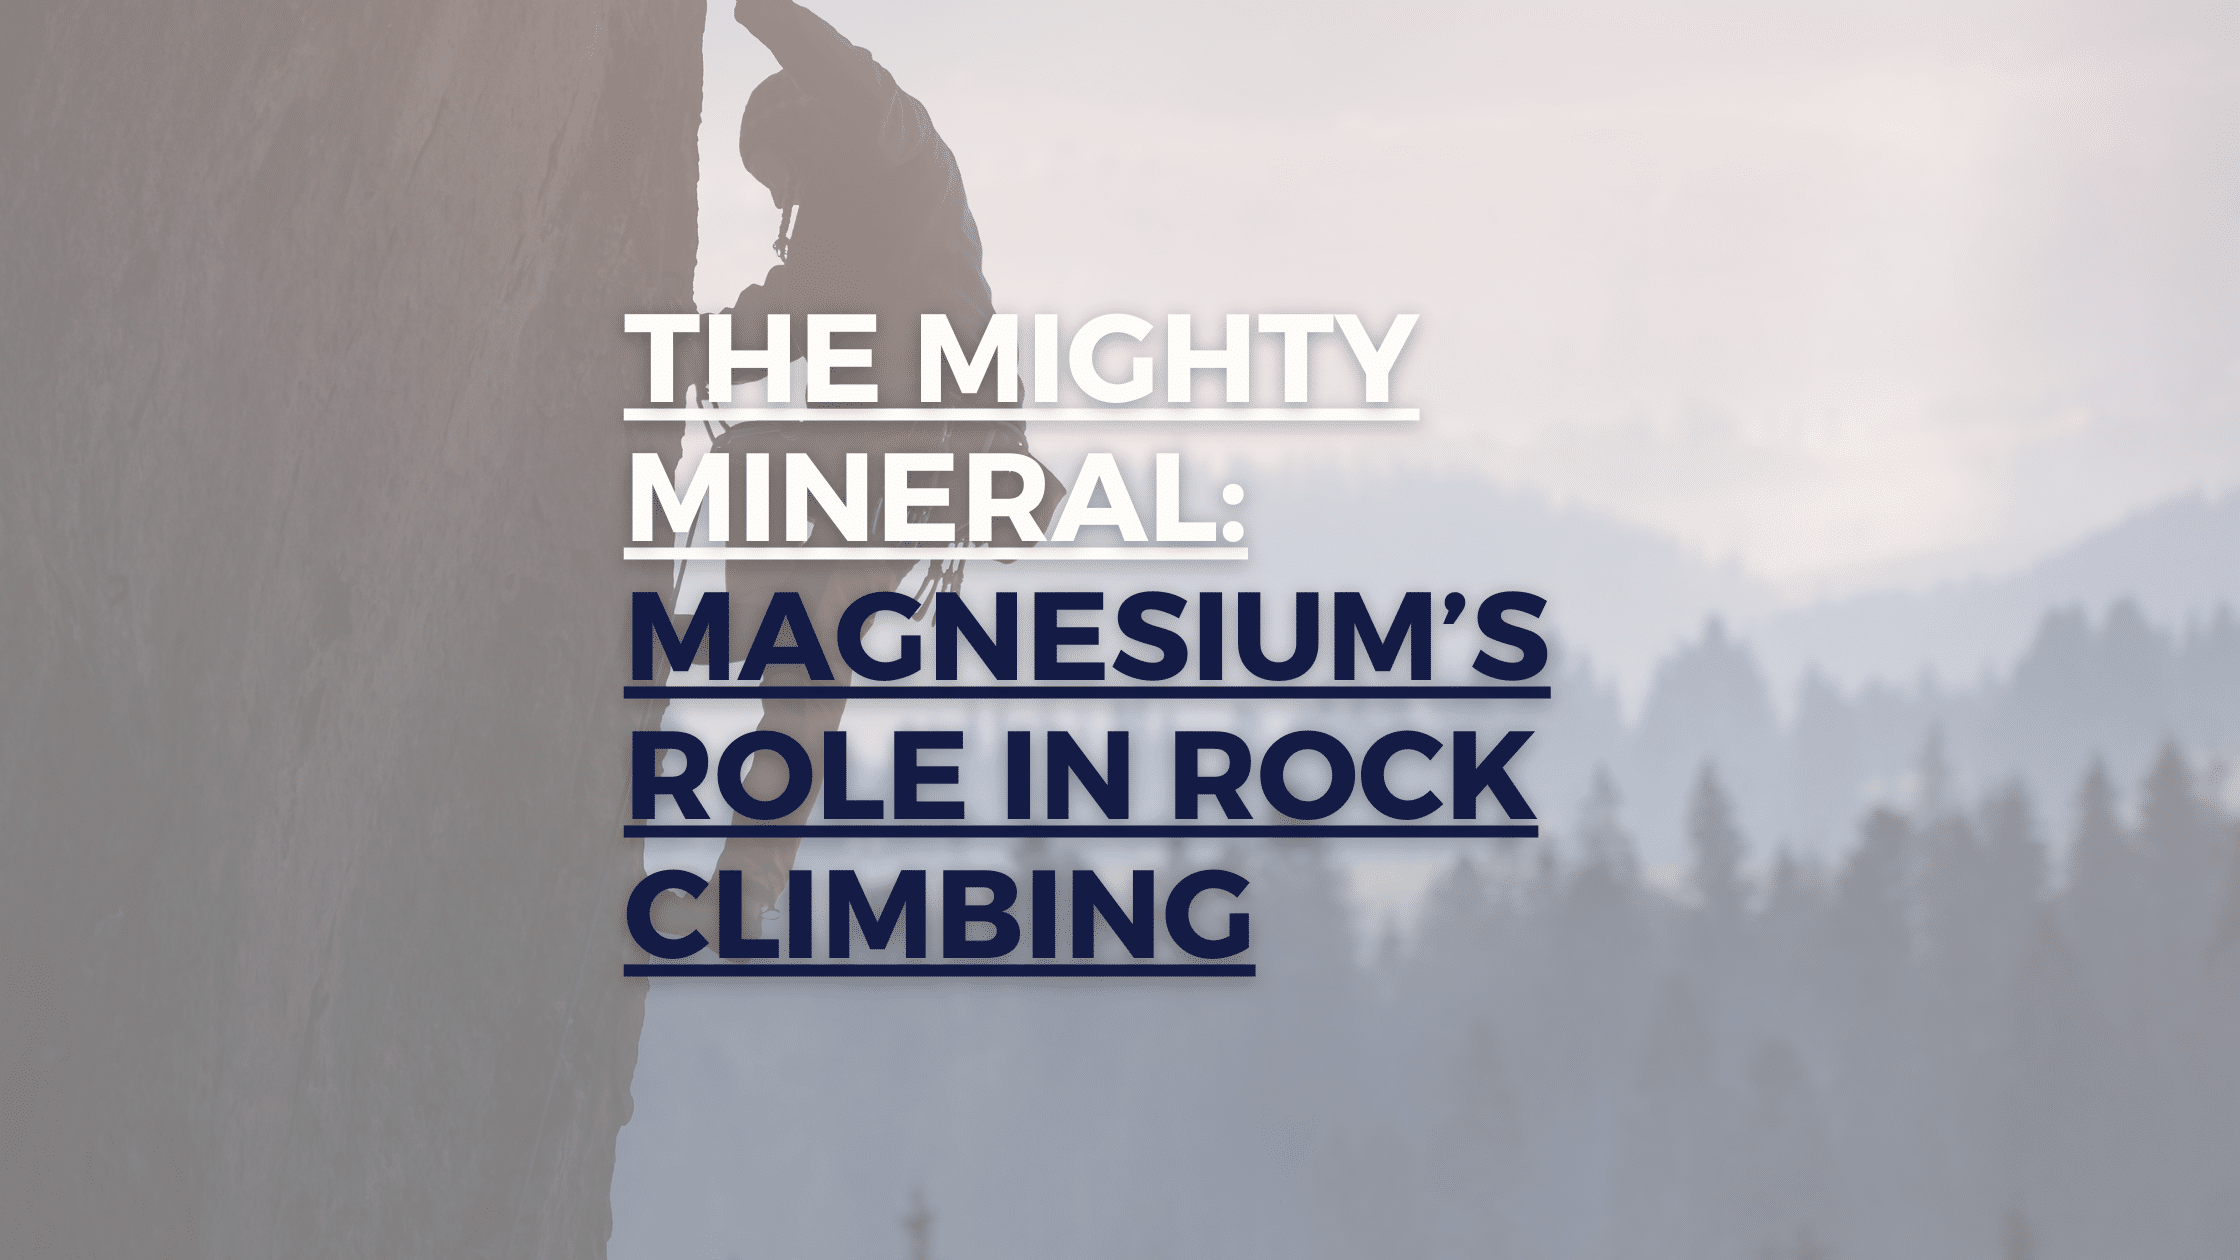 The Mighty Mineral: Magnesium’s Role in Rock Climbing